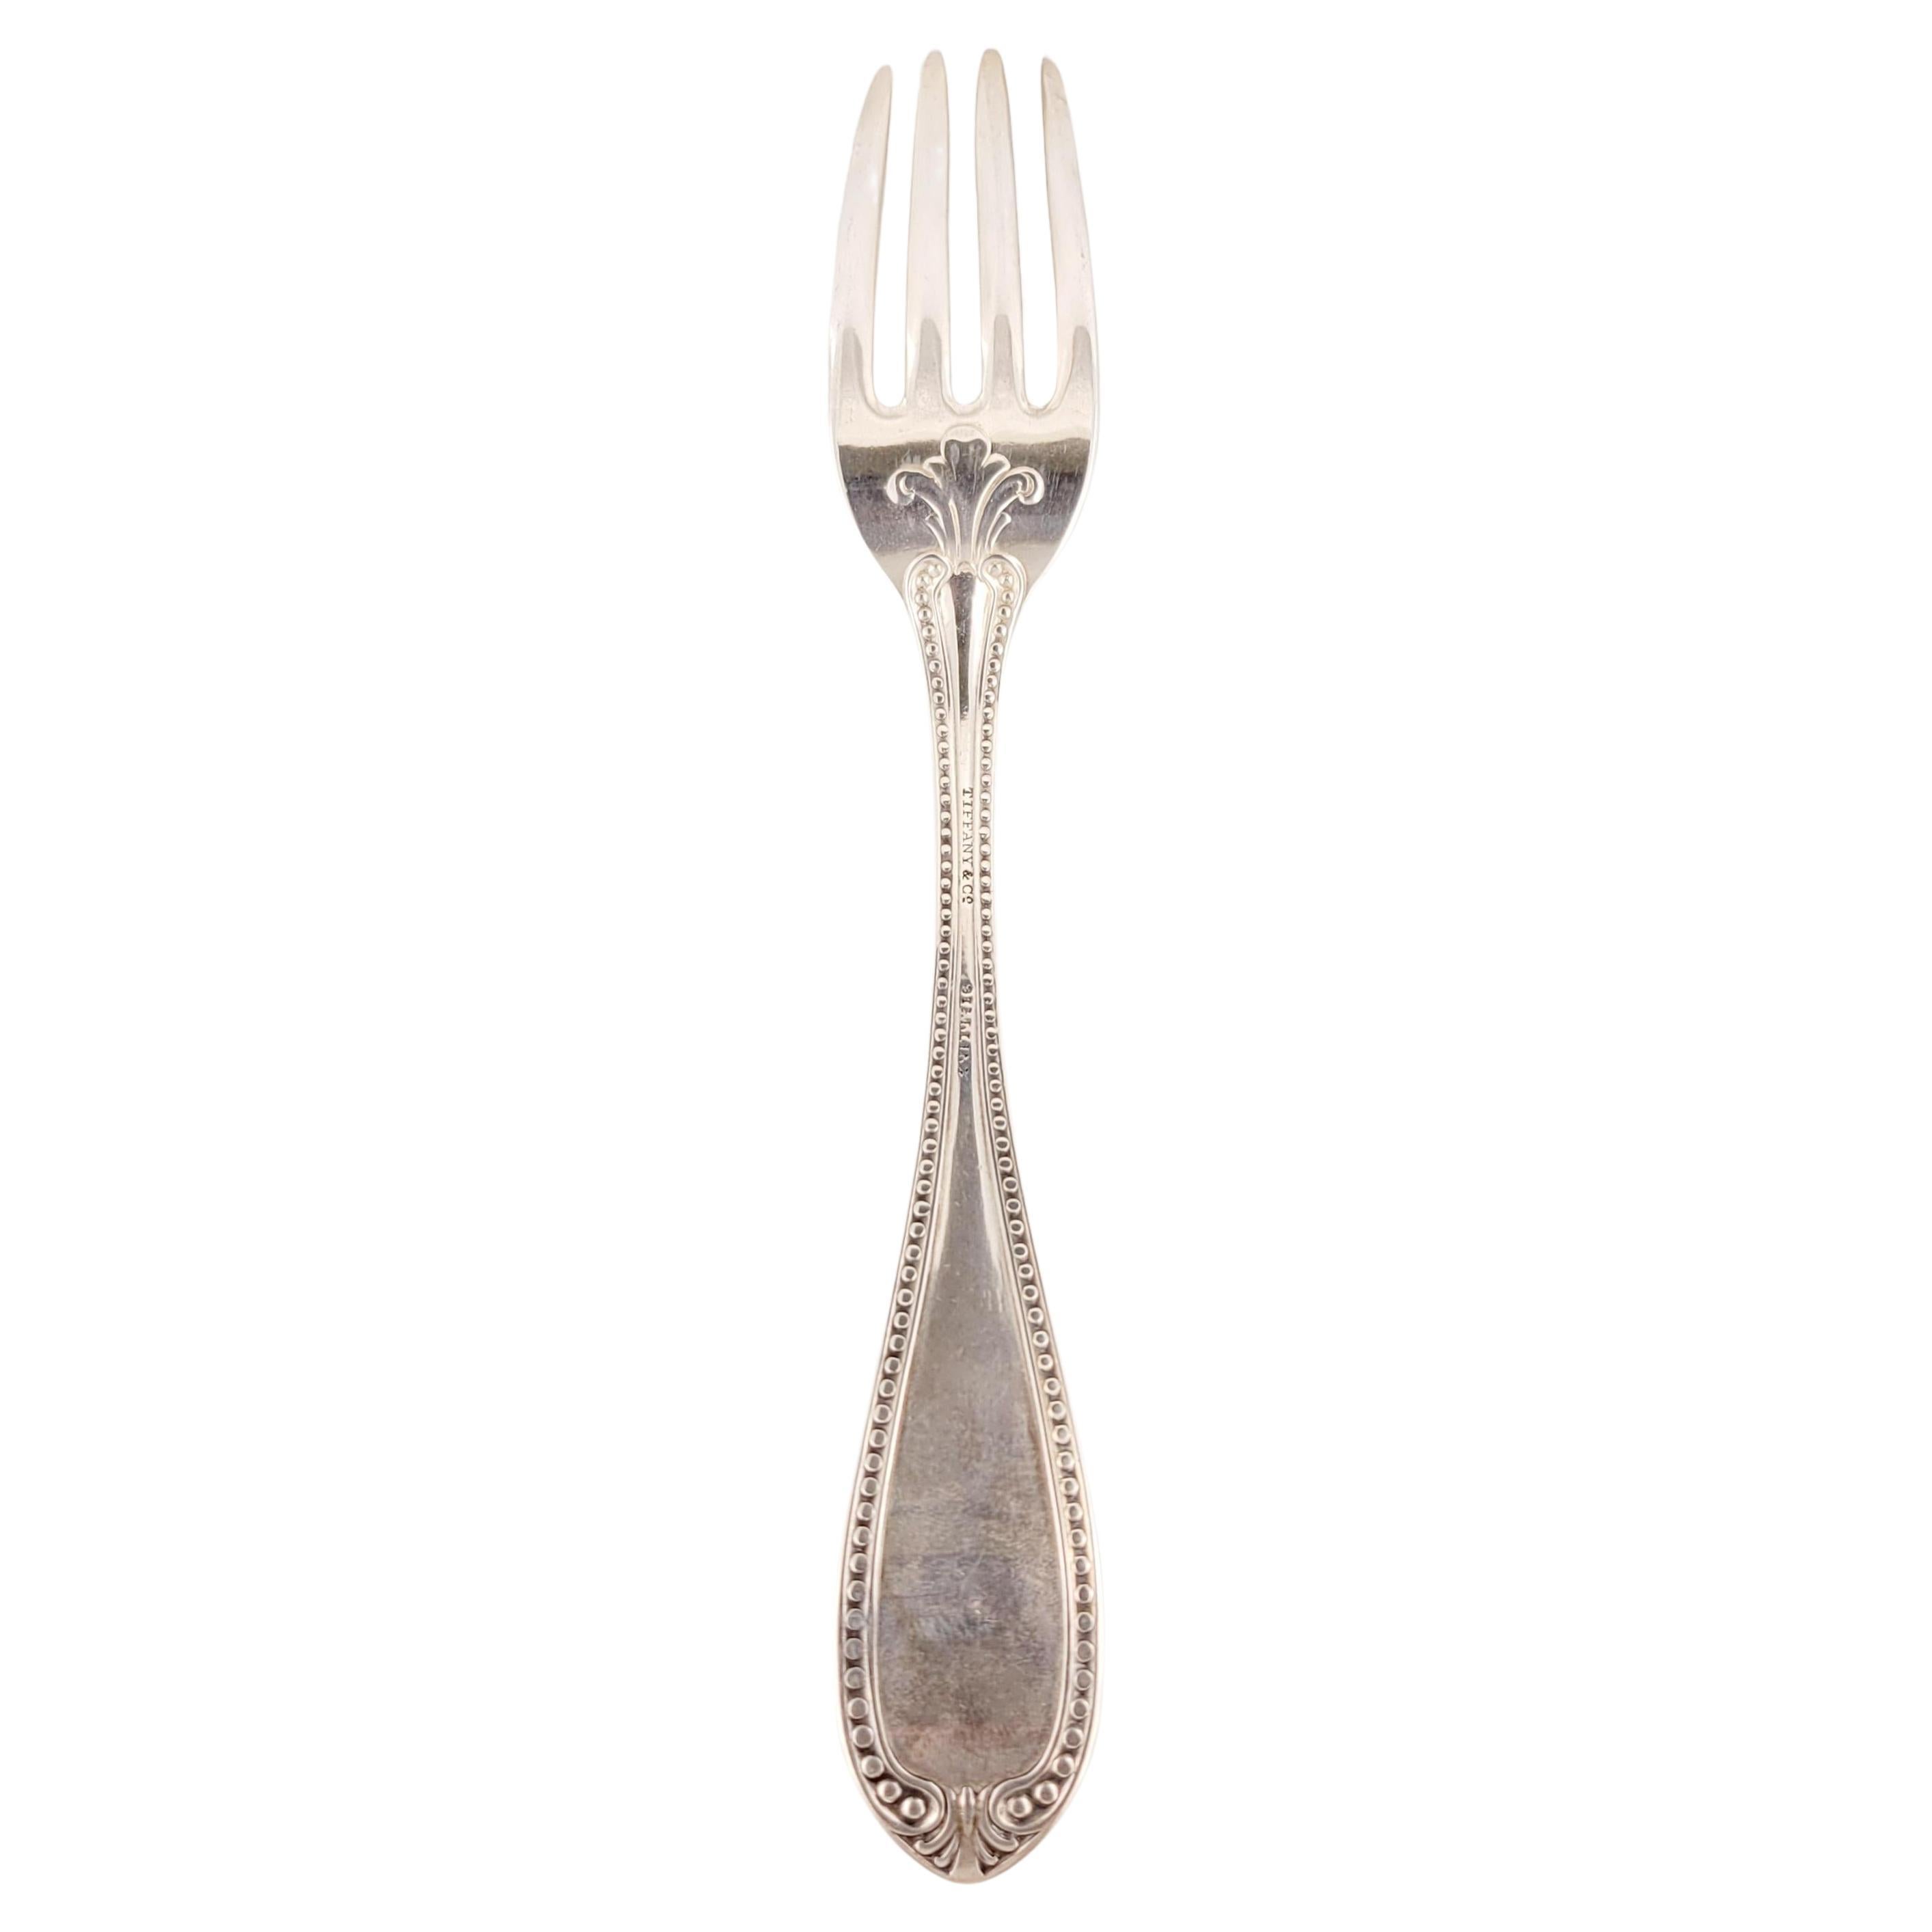 Brand Tiffany& co
Style: Fork  
Material Sterling Silver 925
Fork Length:7.5'' long 
Weight:65.7gr
Condition: Excellent